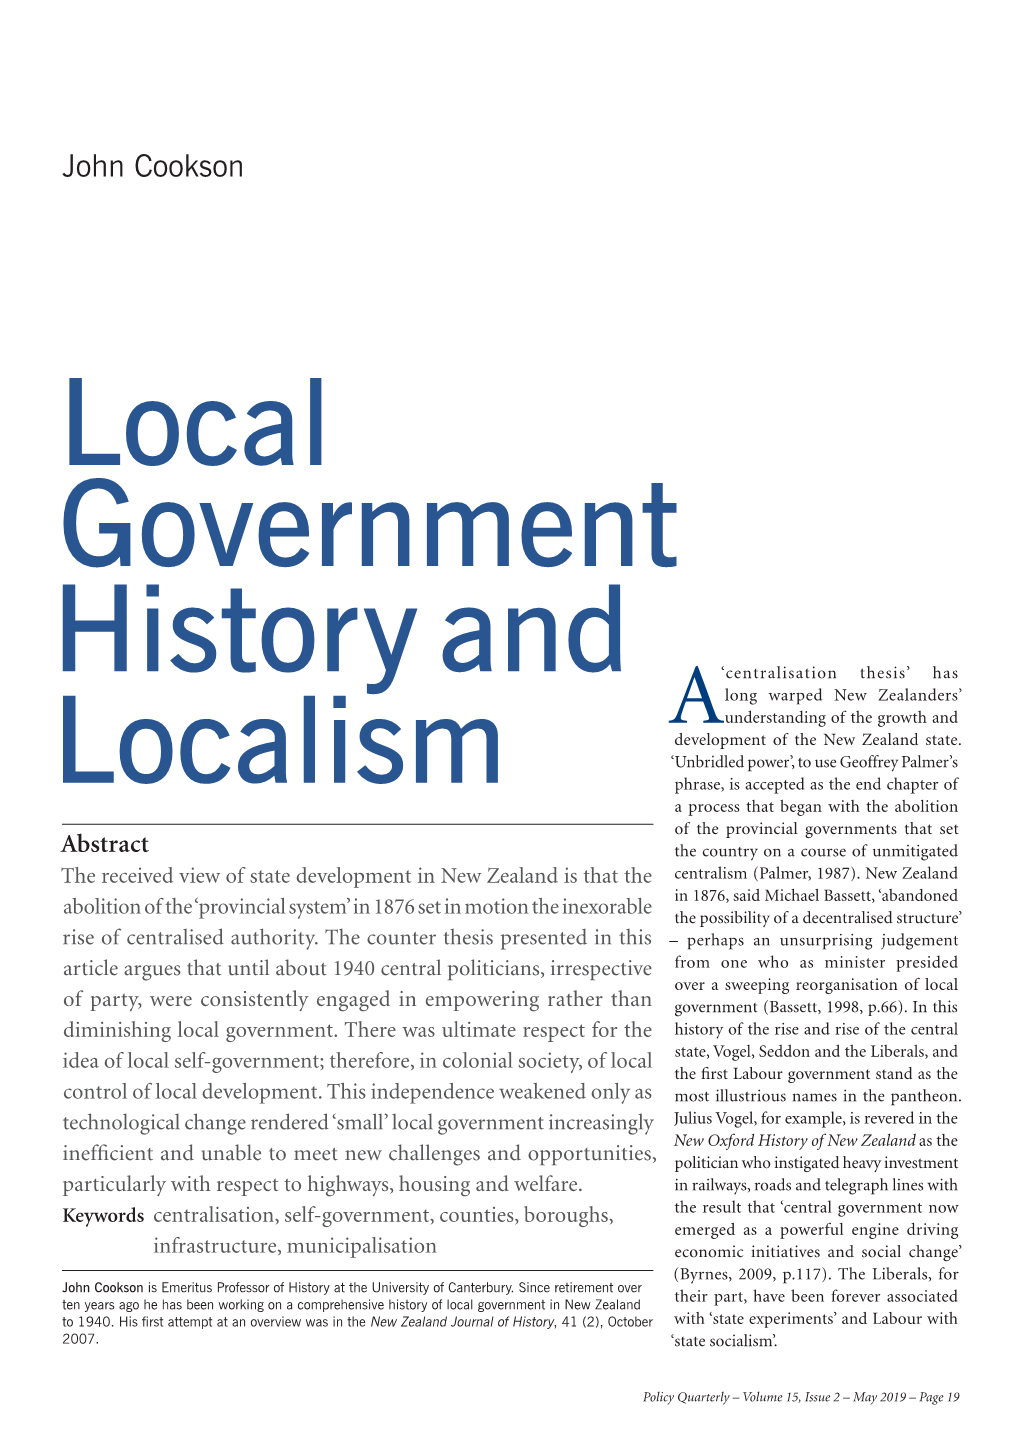 Local Government History and Localism